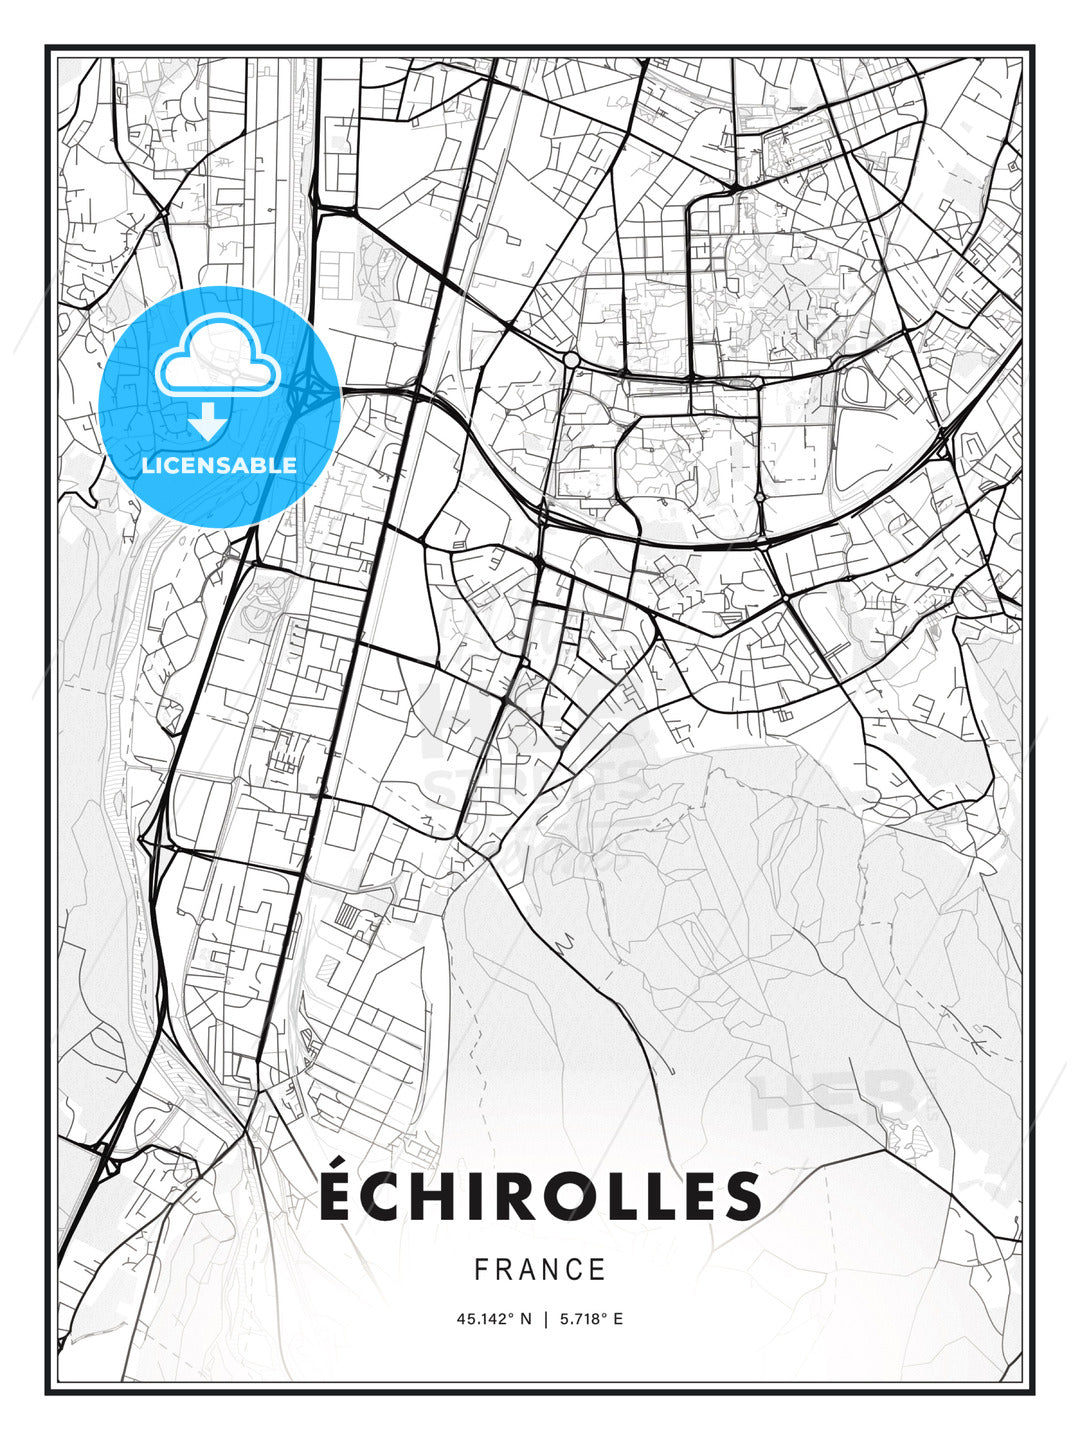 Échirolles, France, Modern Print Template in Various Formats - HEBSTREITS Sketches